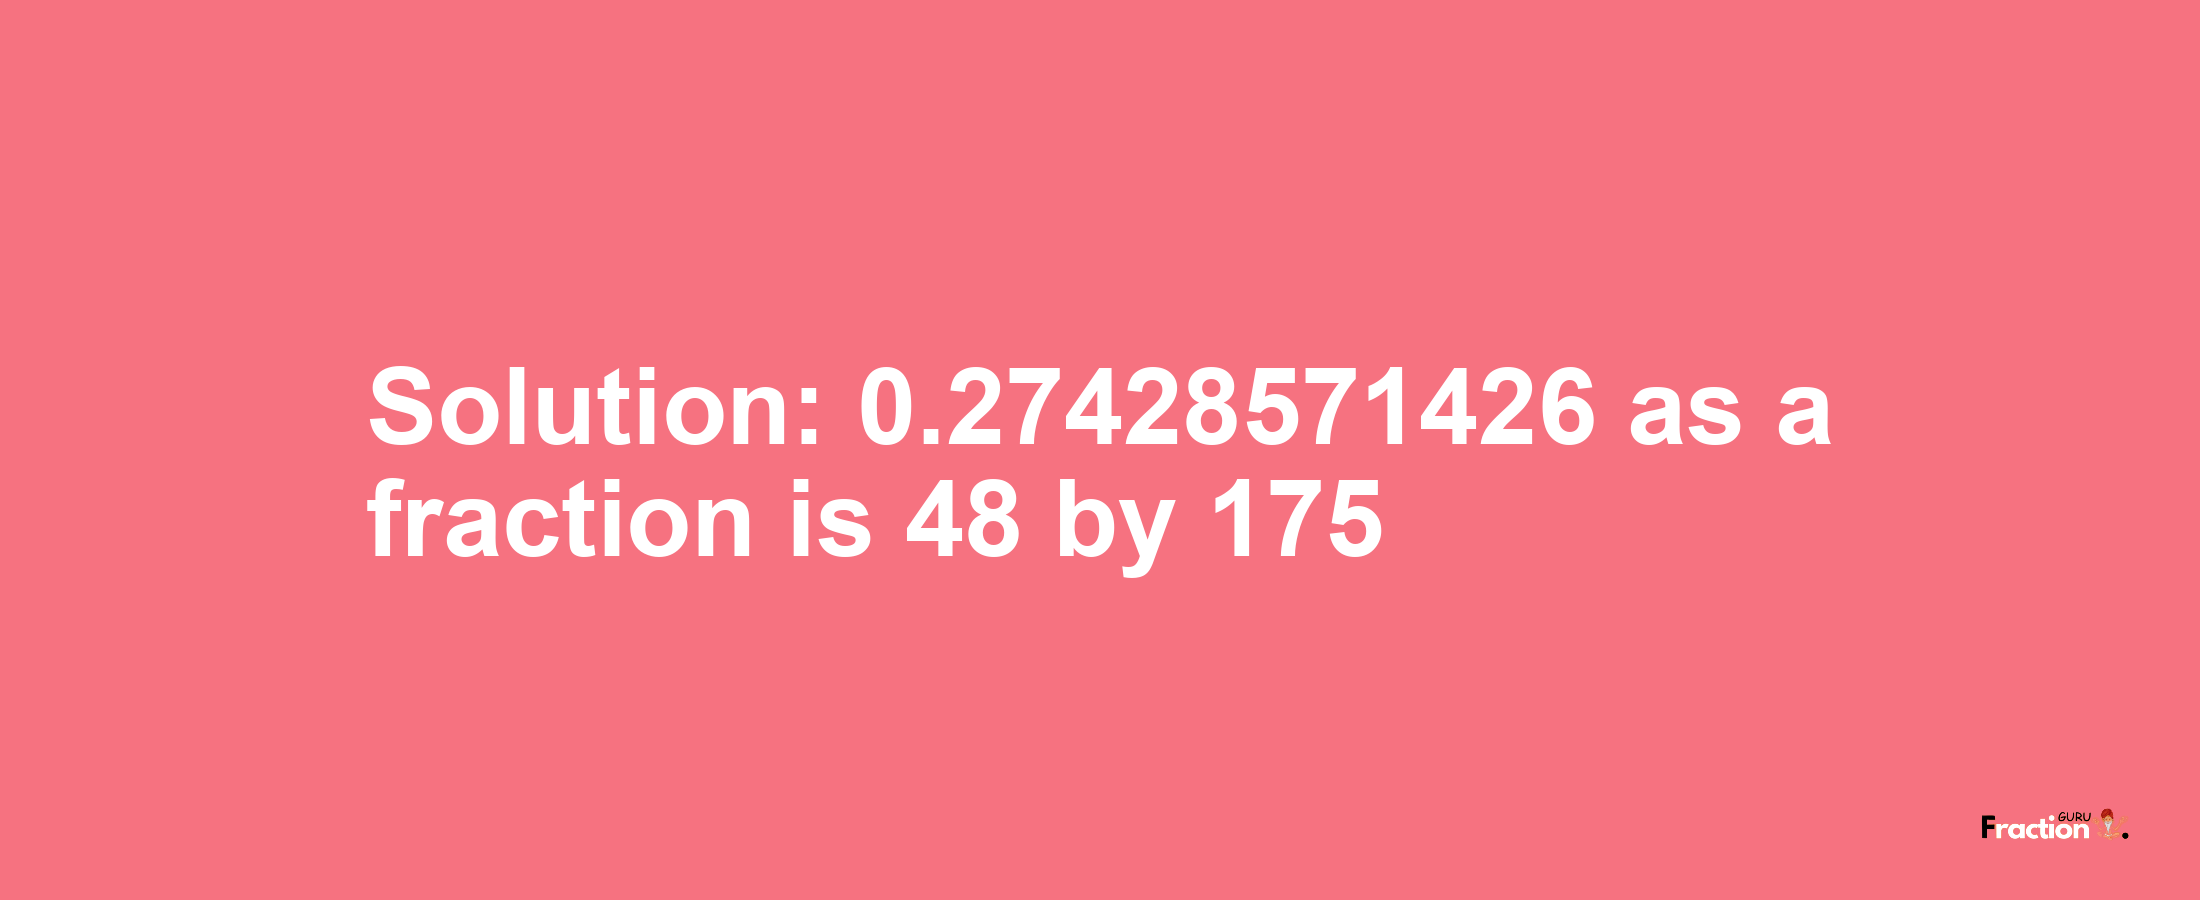 Solution:0.27428571426 as a fraction is 48/175